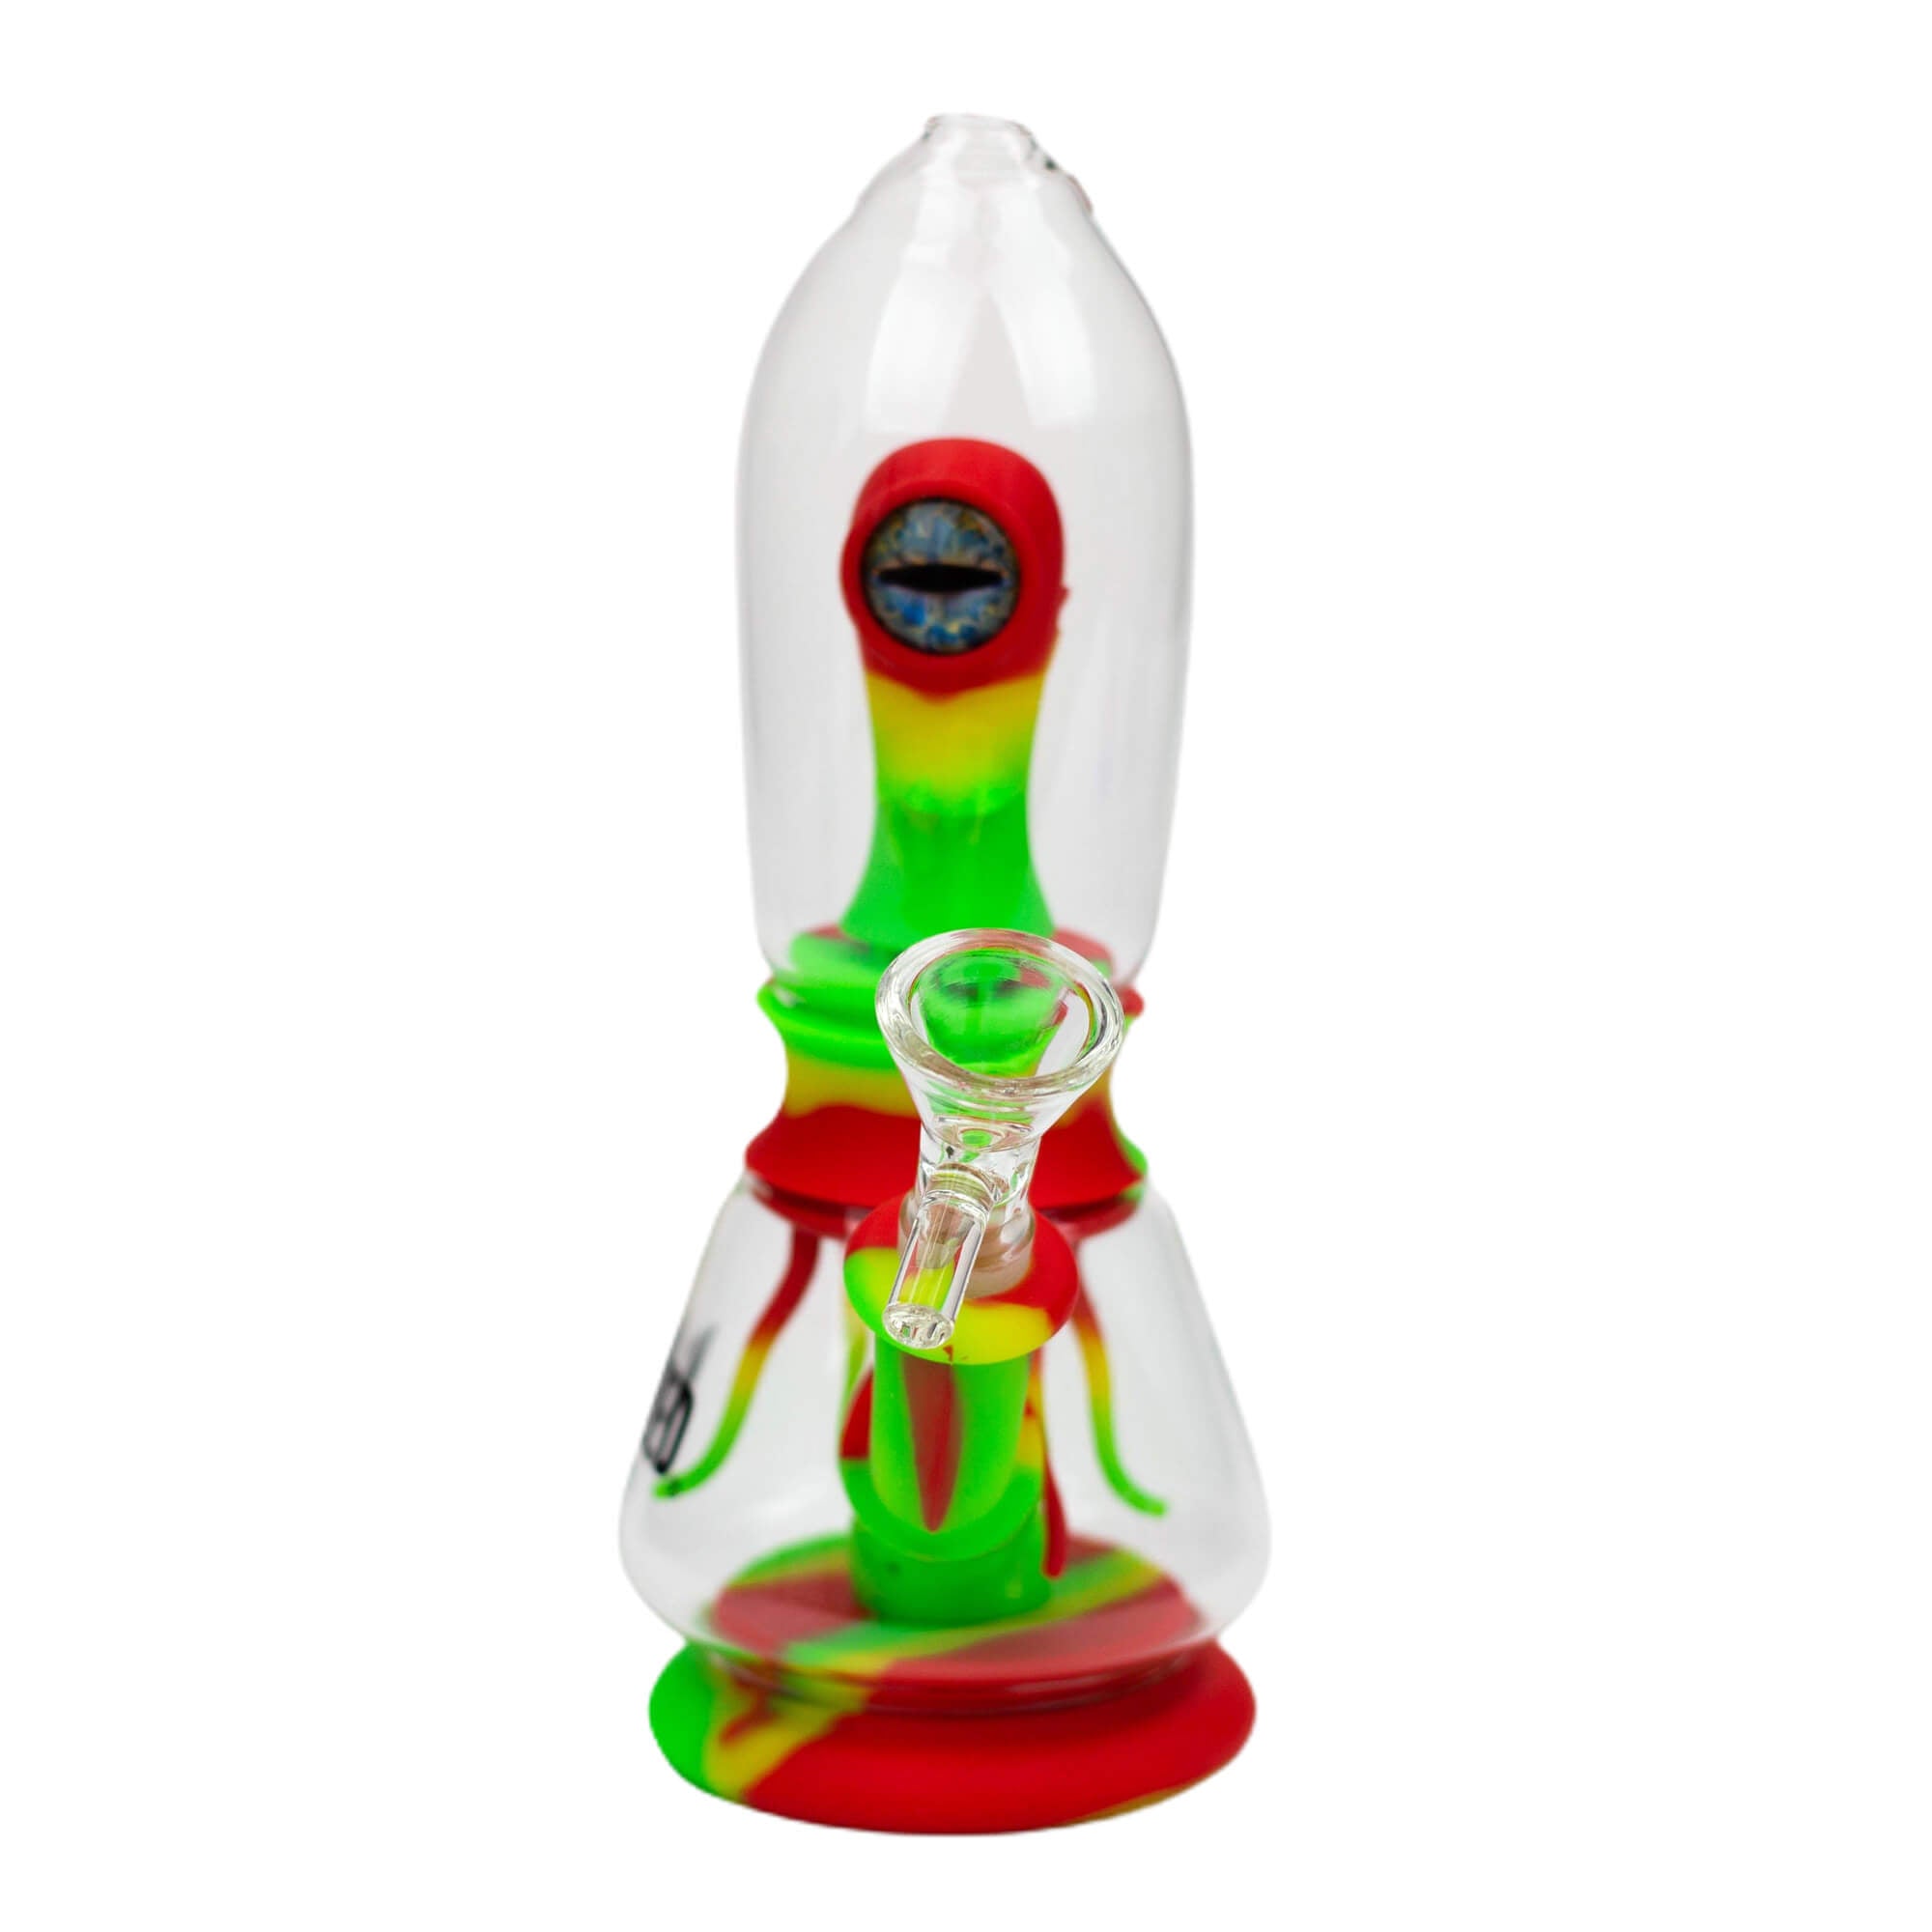 WENEED - 7" Silicone Monster Double Filter Bong 